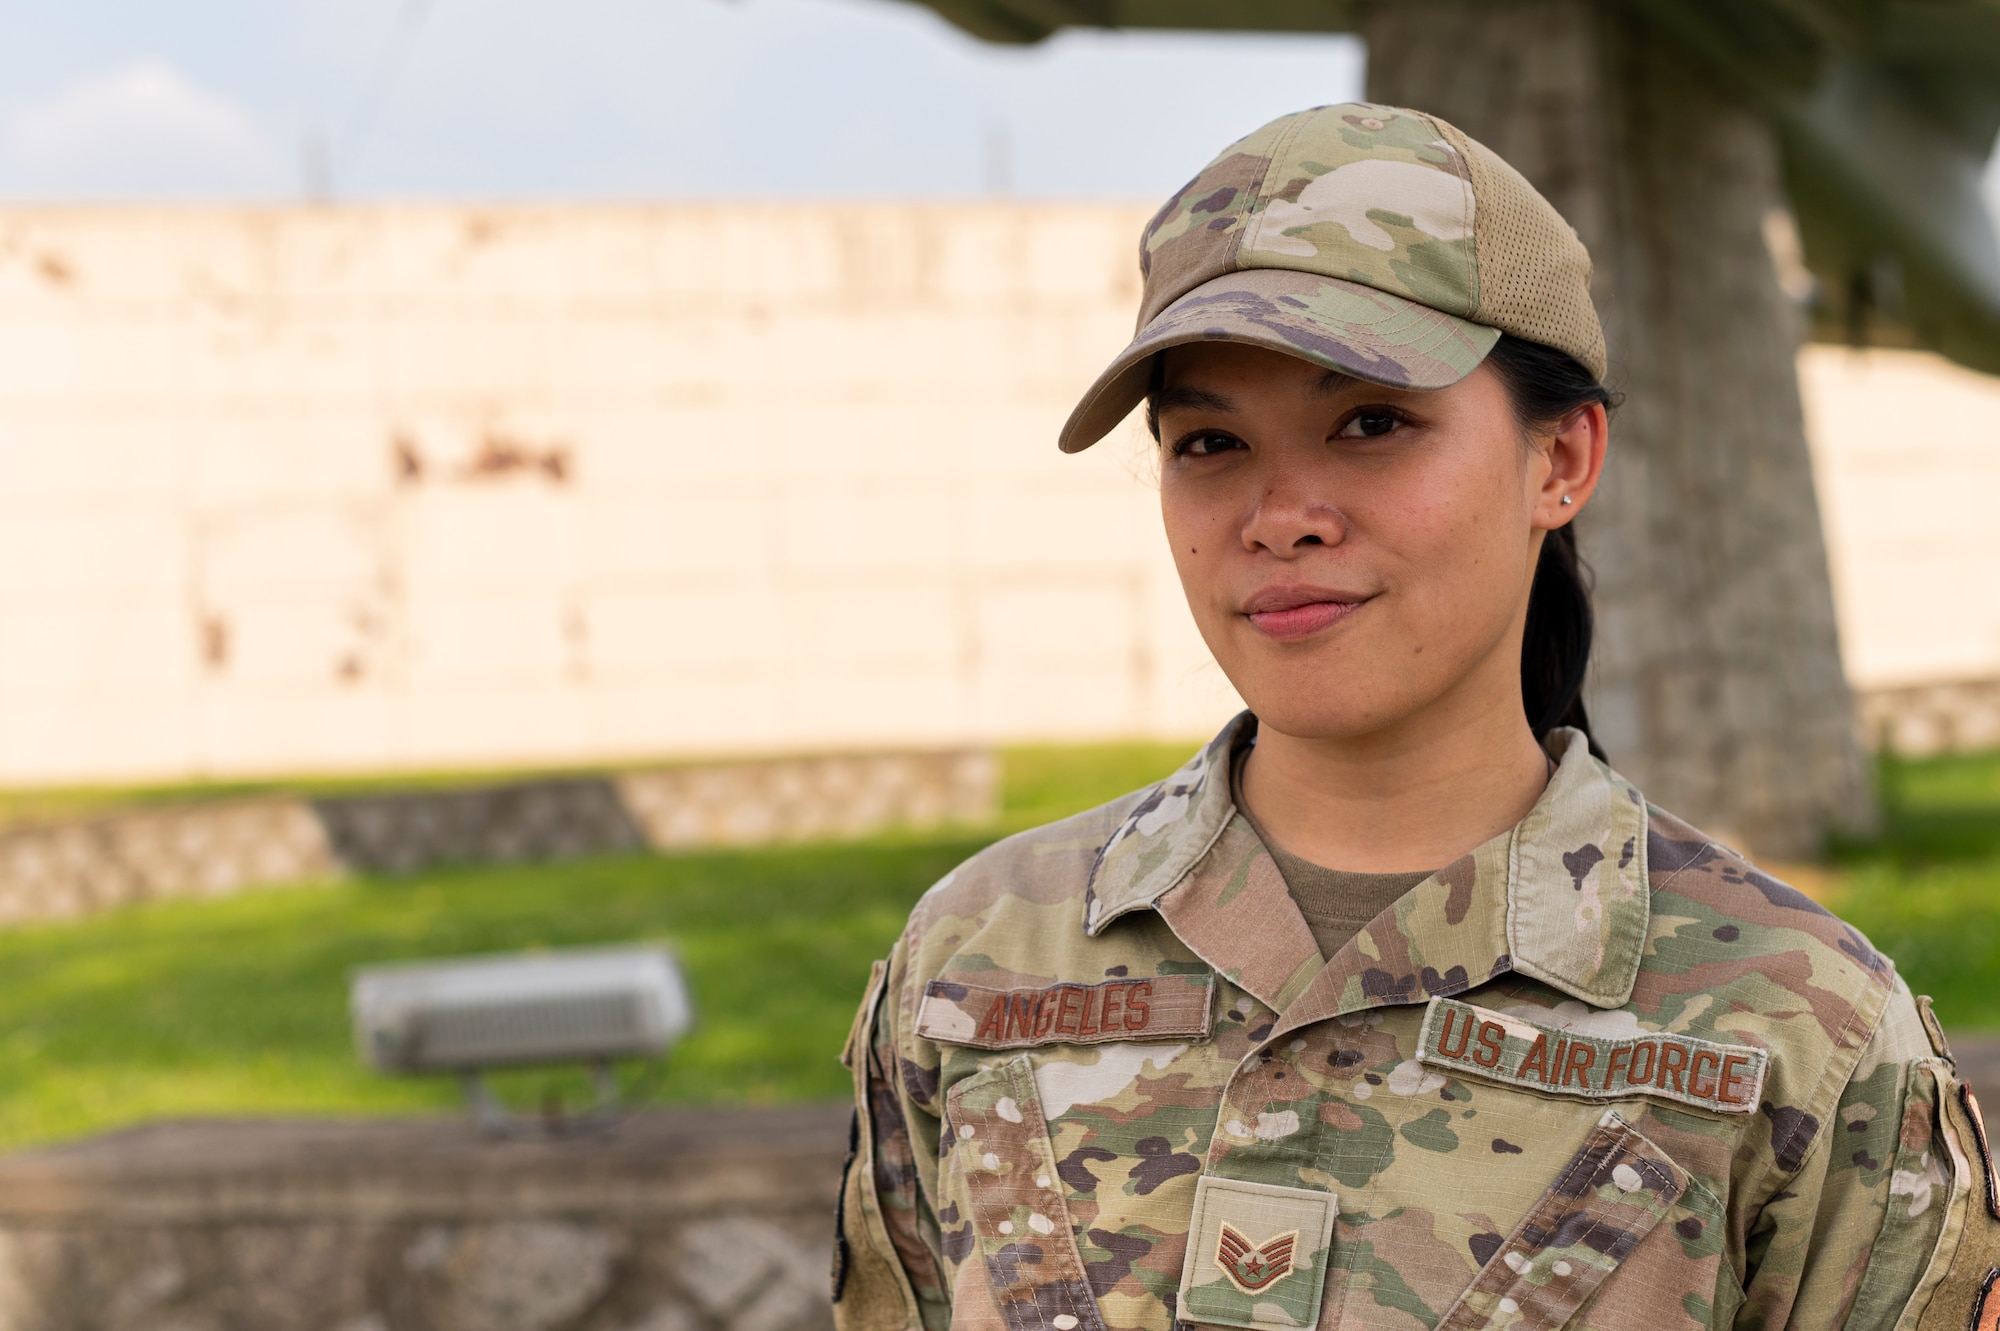 U.S. Air Force Staff Sgt. Joy Angeles, 51st Comptroller Squadron financial analyst, poses for a photo at Osan Air Base, Republic of Korea, June 5, 2024. Angeles earned the title of Mustang of the Week for her dedication to the unit and the 51st Fighter Wing mission.  Angles contributes to the 51st FW by directing accounting programs, conducting audits, and resolving and realigning $112,000 towards critical mission requirements. (U.S. Air Force photo by Senior Airman Kaitlin Frazier)